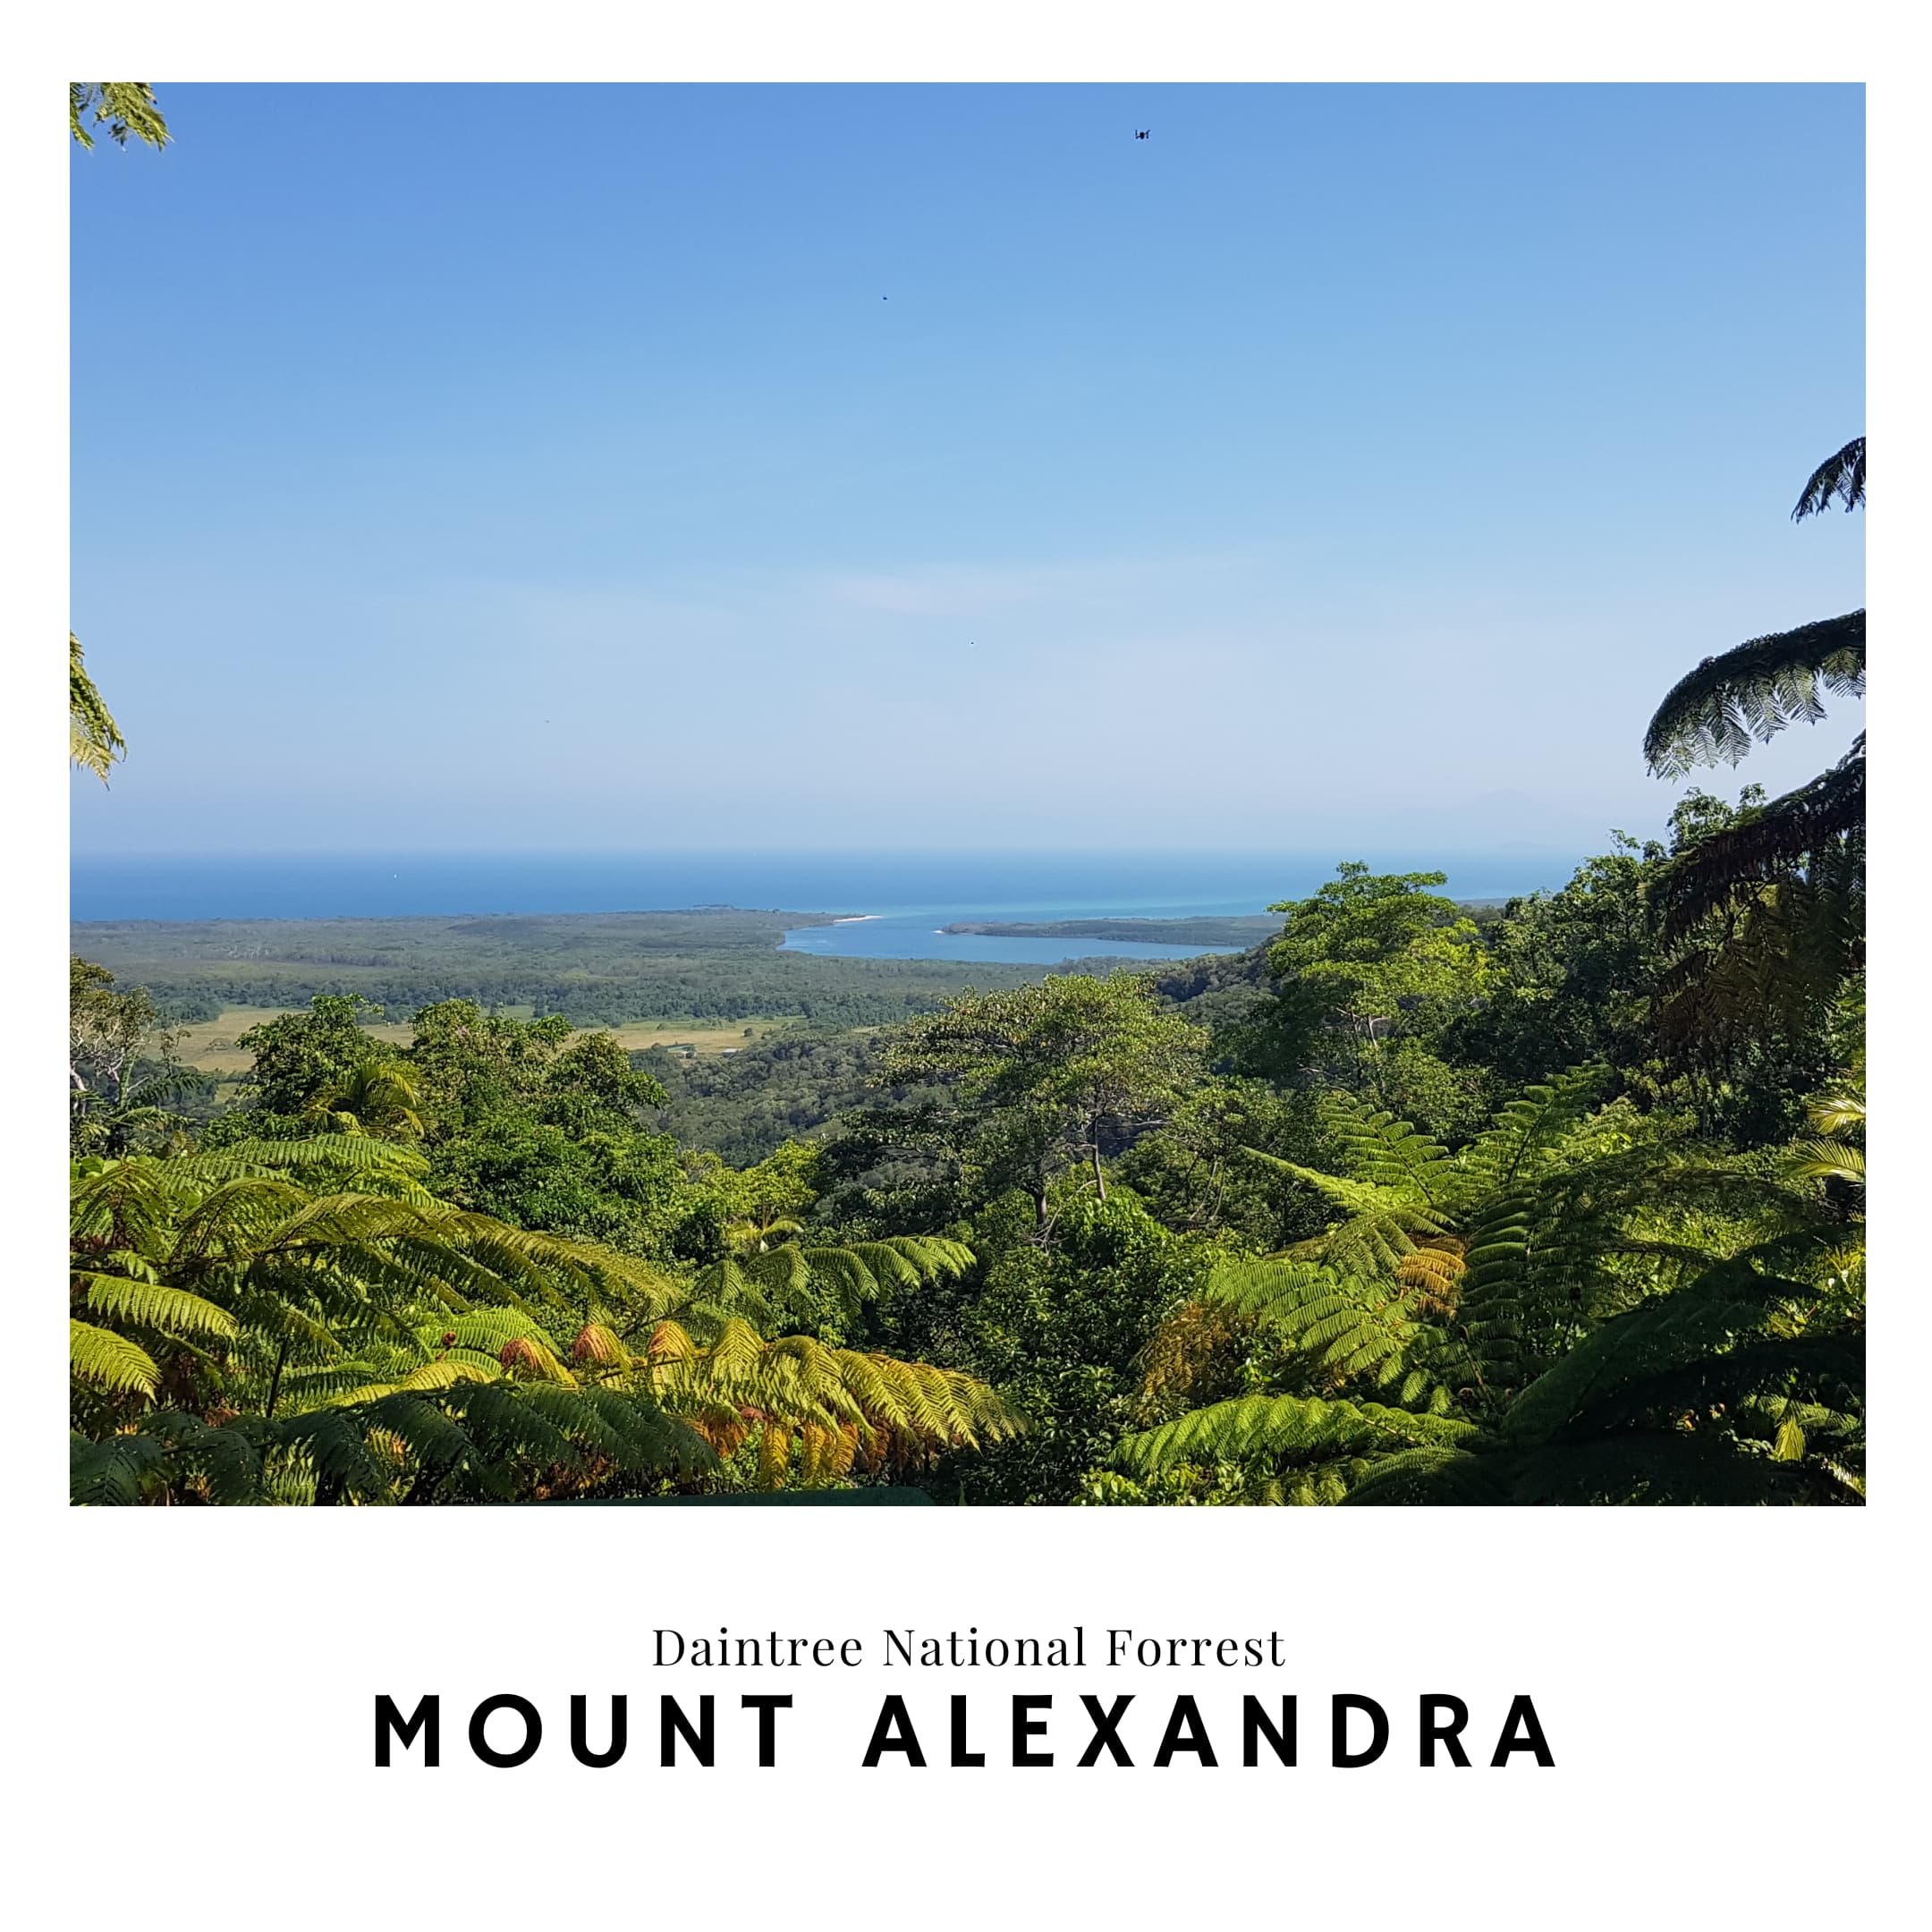 Link to the Mount Alexandra